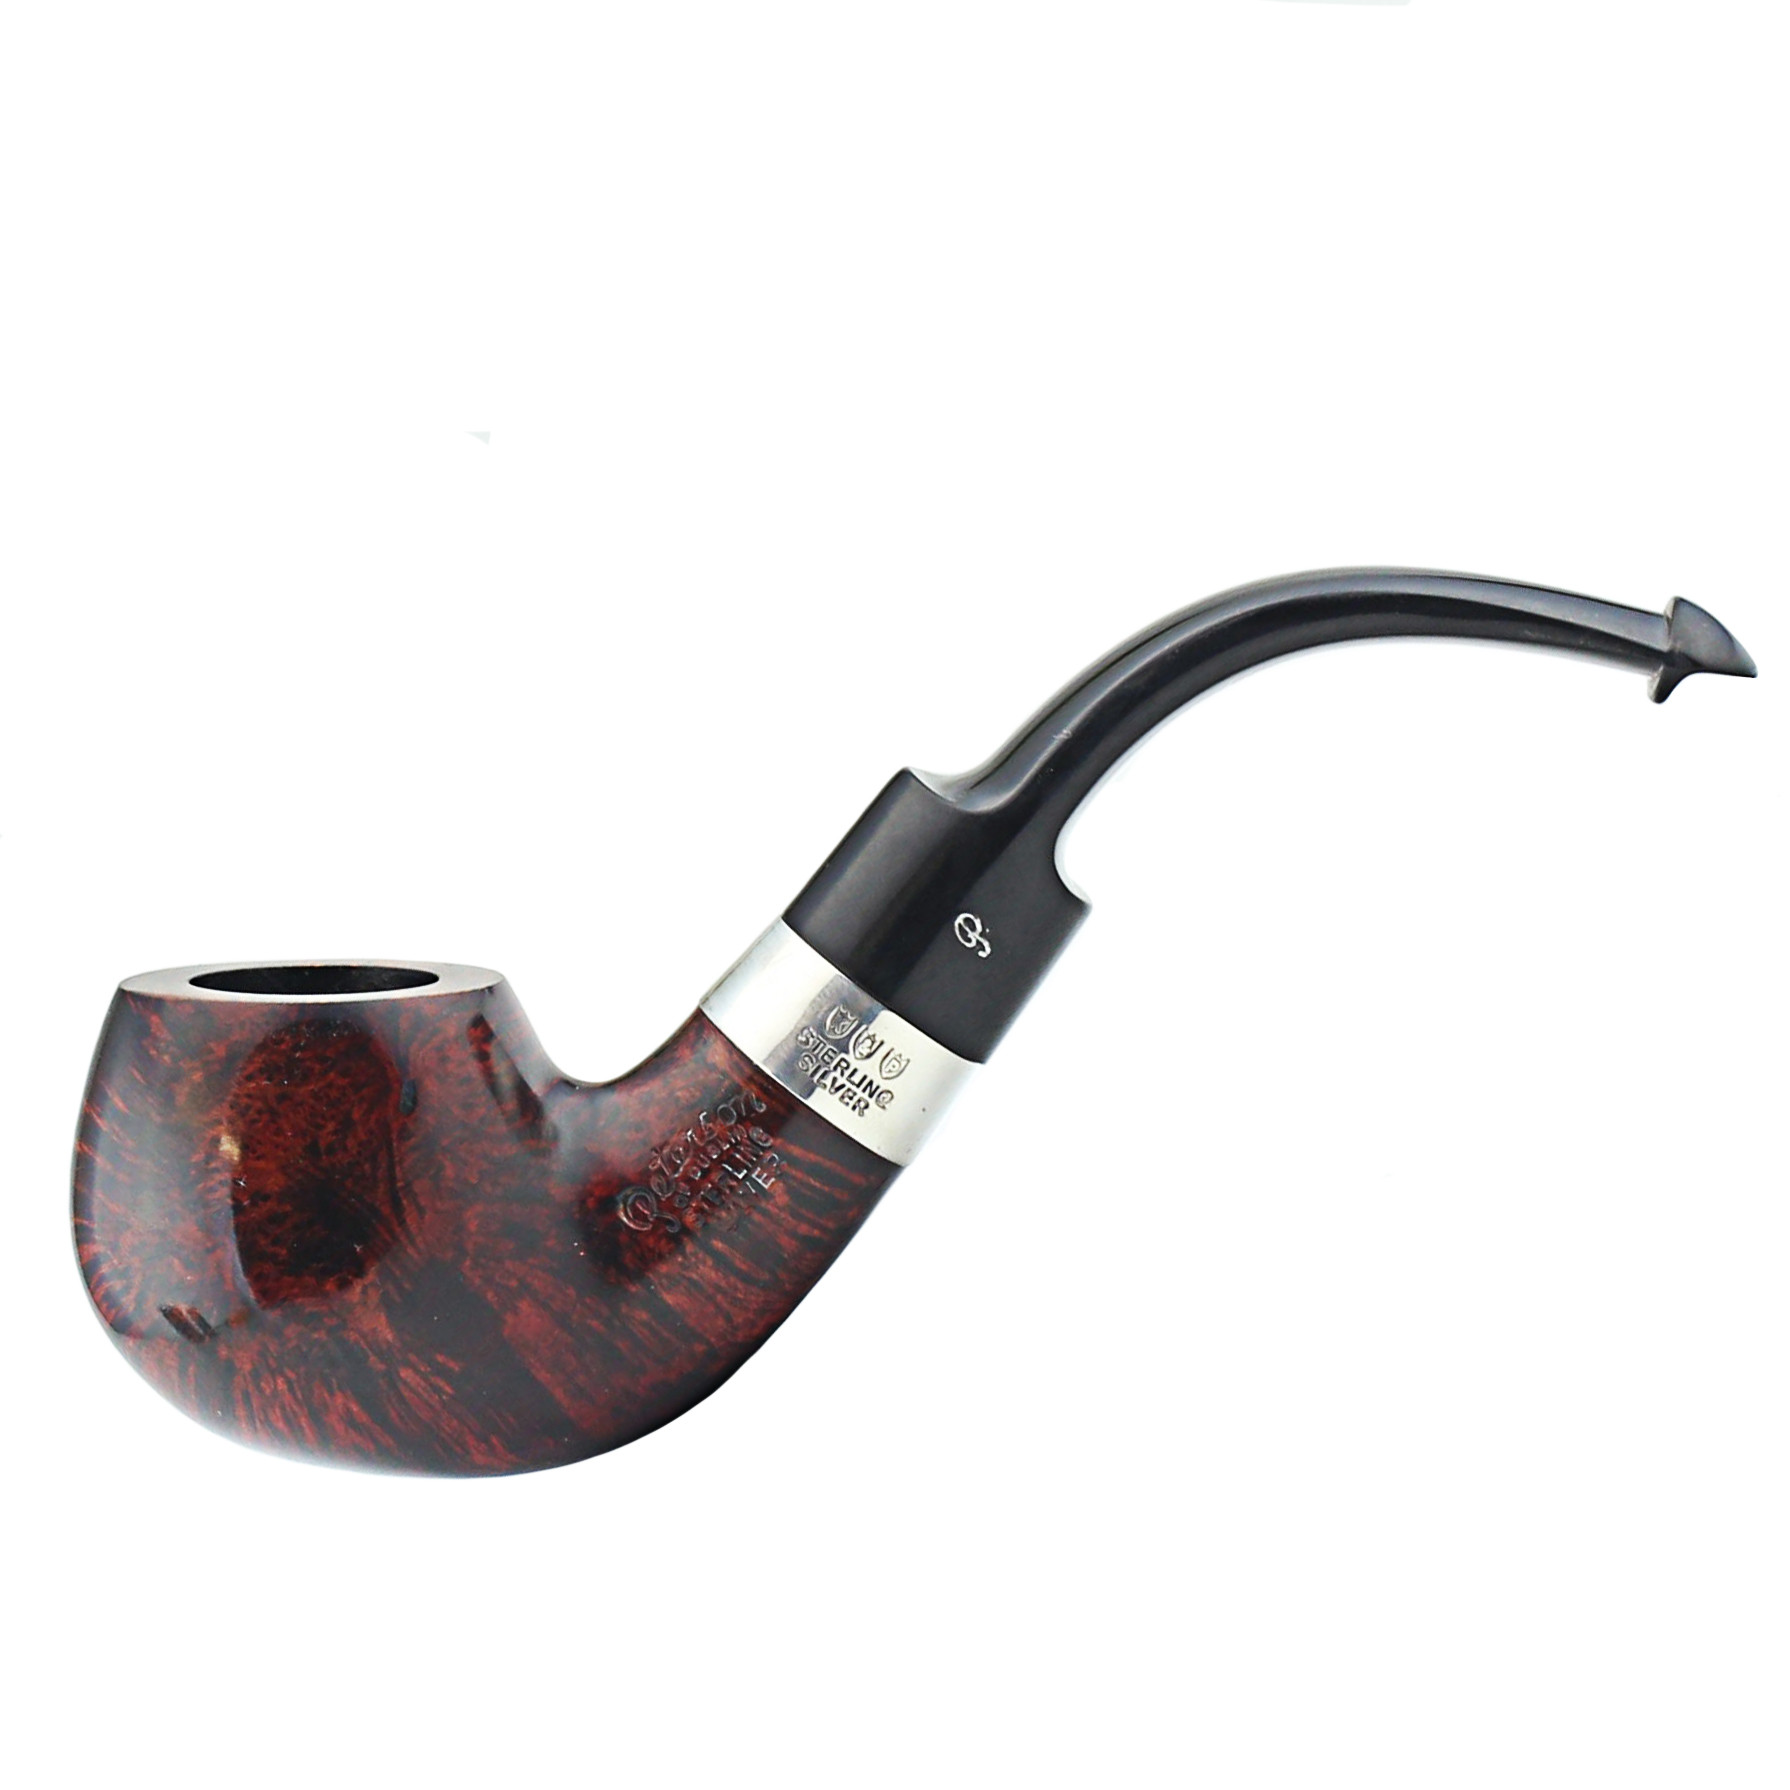 Tobacco pipe CarvedLion Smoking Tobacco Pipe 5.5 in Exclusive Designed for Pipe Smokers and Pouch